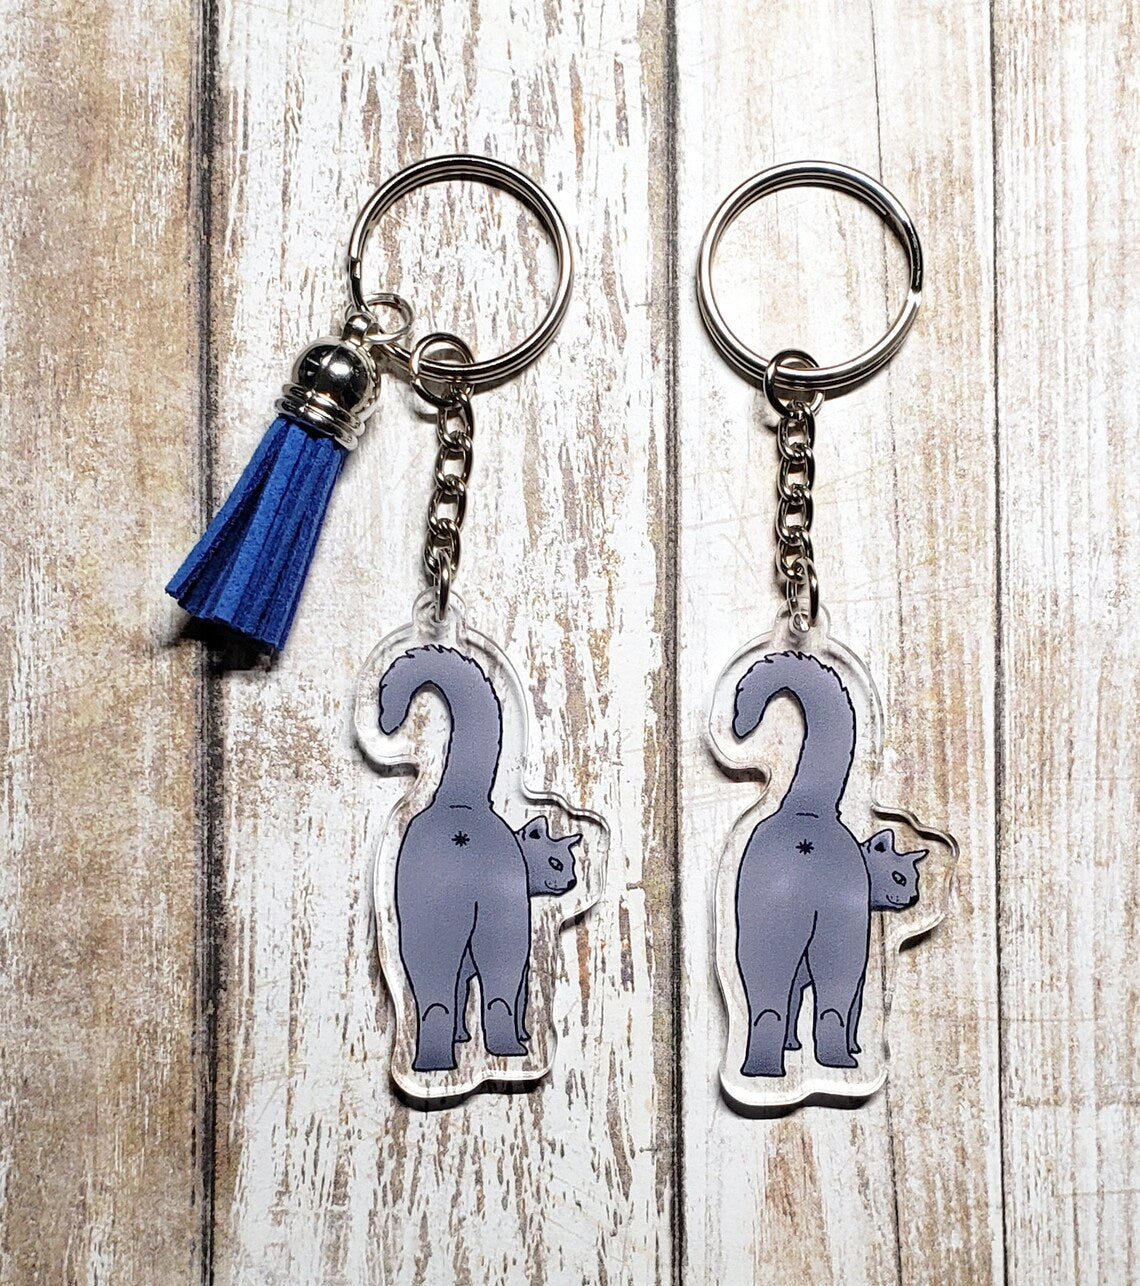 A photo of two cat key chains. The keychain has a cat butt on it.